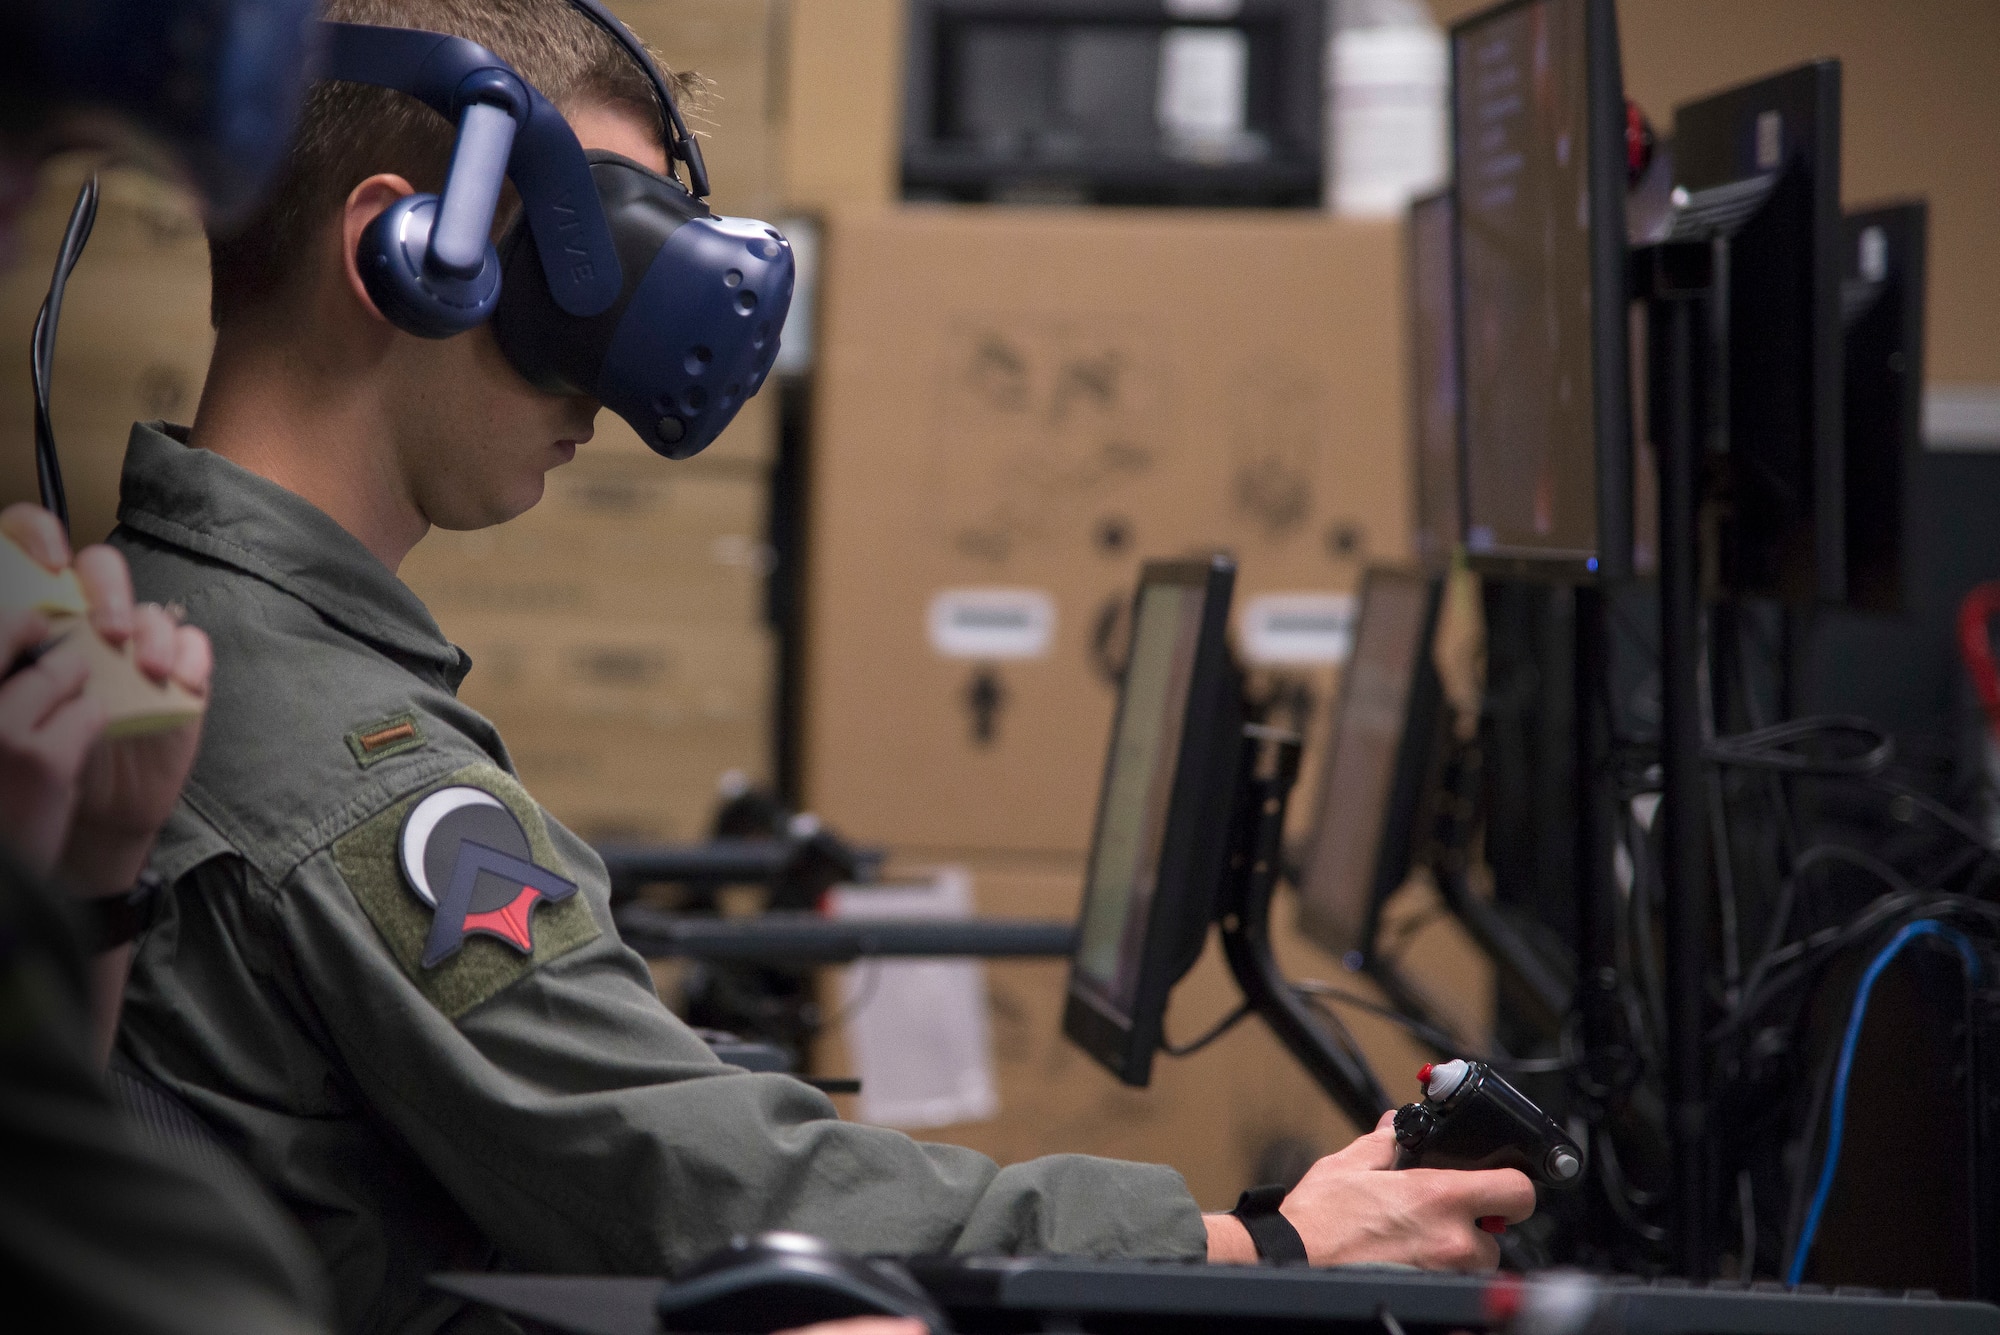 U.S. Air Force Second Lt. Austin Sneed, Pilot Training Next student, trains on a virtual reality flight simulator at the Armed Forces Reserve Center in Austin, Texas, June 18, 2018. Air Education and Training Command officials announced the second iteration of Pilot Training Next would begin in January 2019 during a panel at the 2018 Air Force Association Air, Space and Cyber Conference in National Harbor, Maryland. (U.S. Air Force photo by Sean M. Worrell)